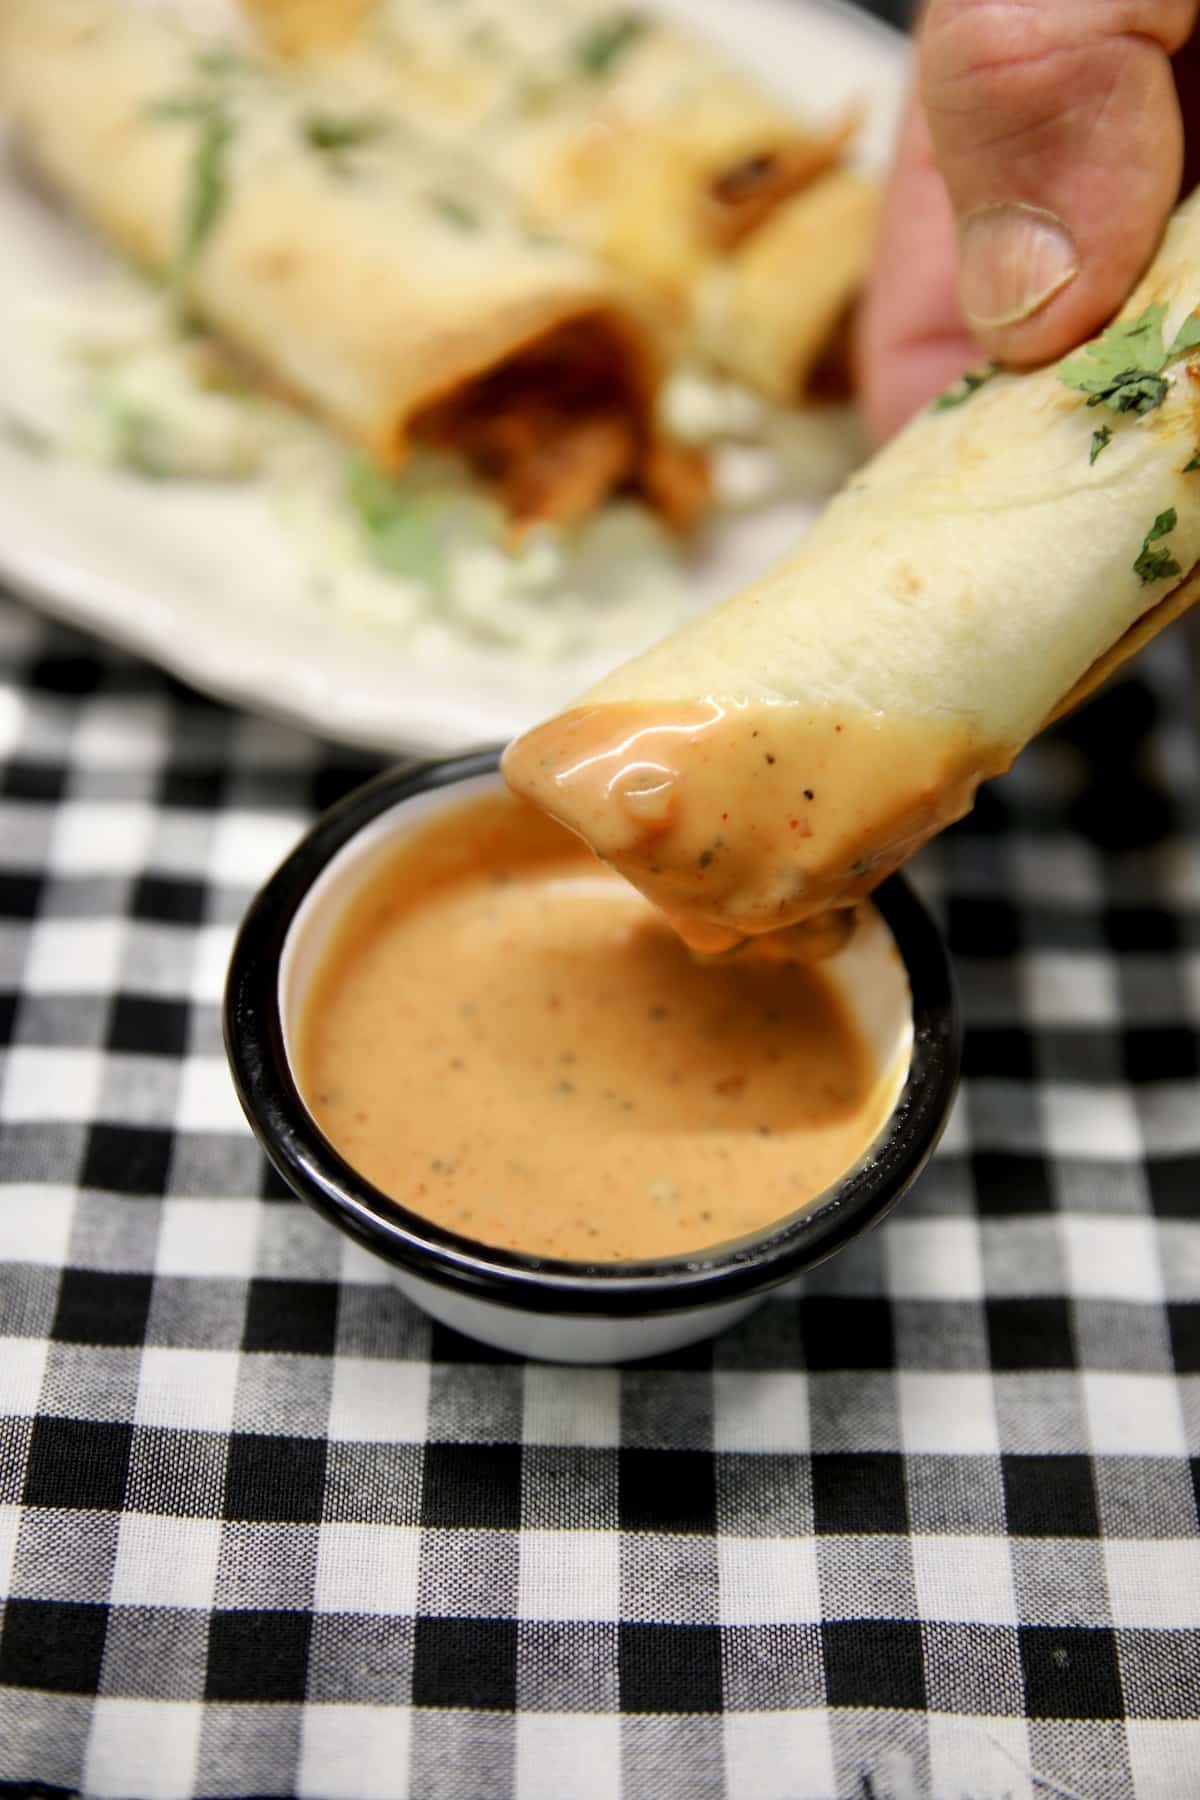 BBQ Chicken taquito dipping in sauce.